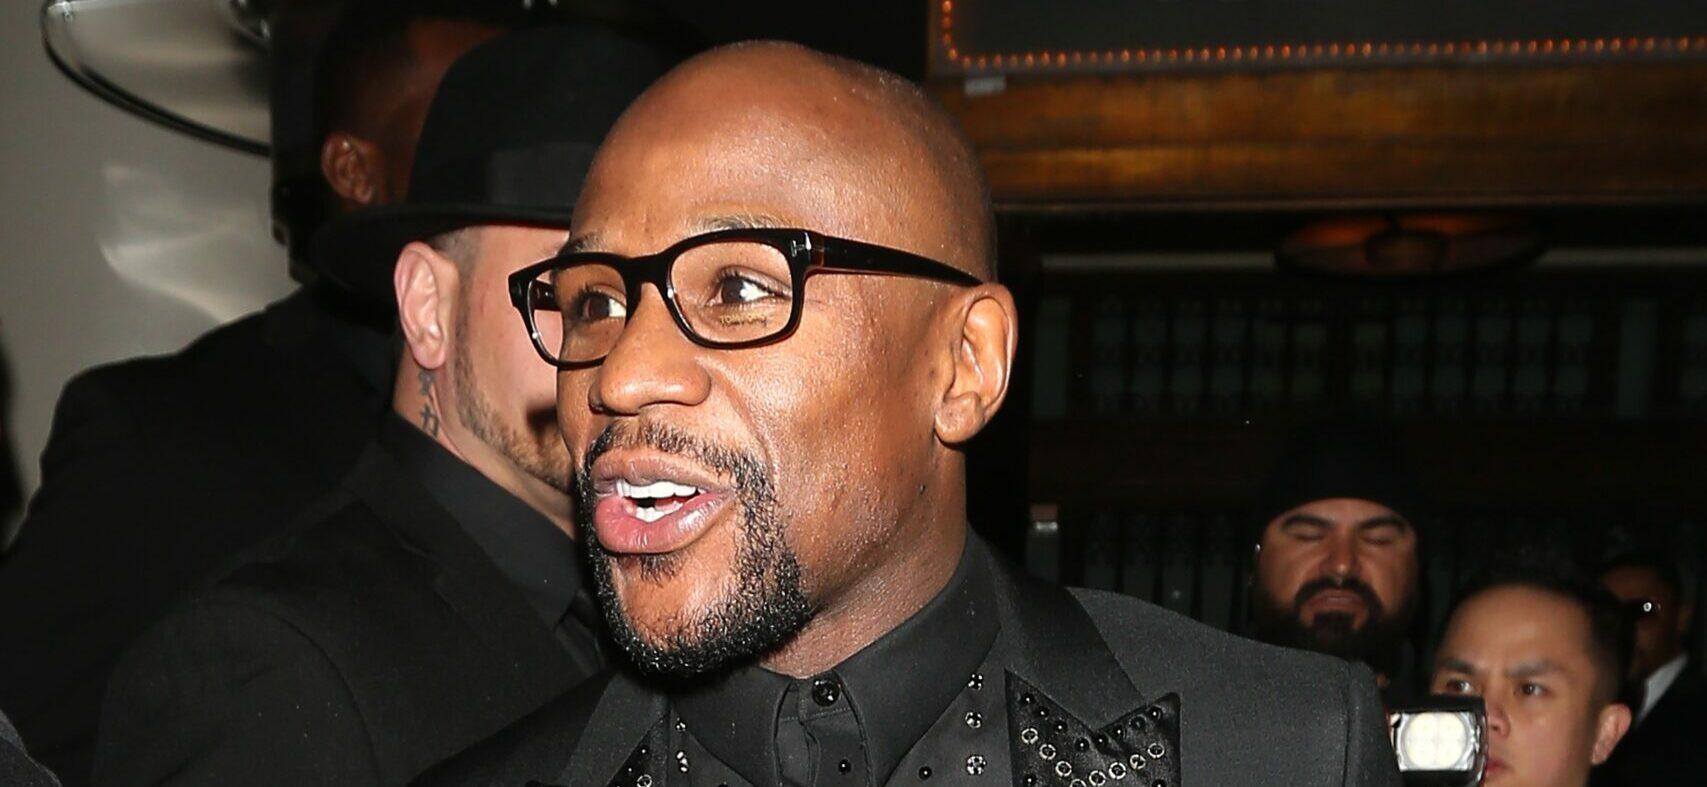 Floyd Mayweather ll smiles as he is spotted going to The Reserve to celebrate his 41st birthday